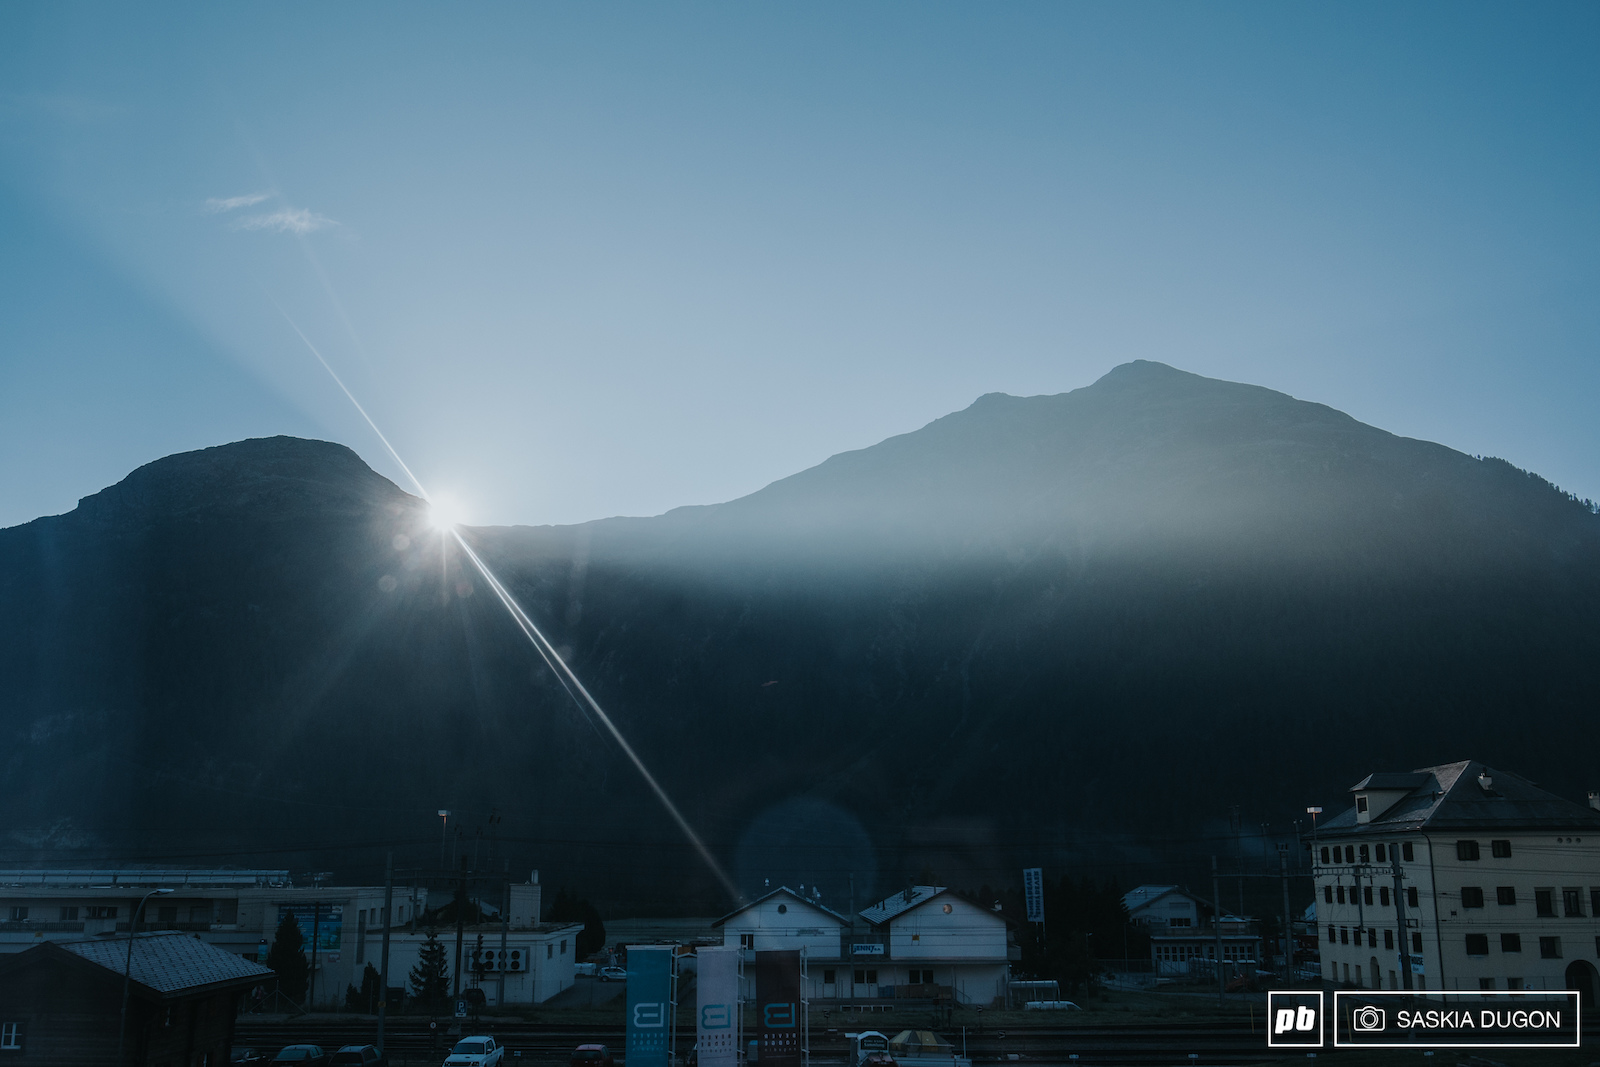 The sun peaking over mountains to wake the small town of Bever.